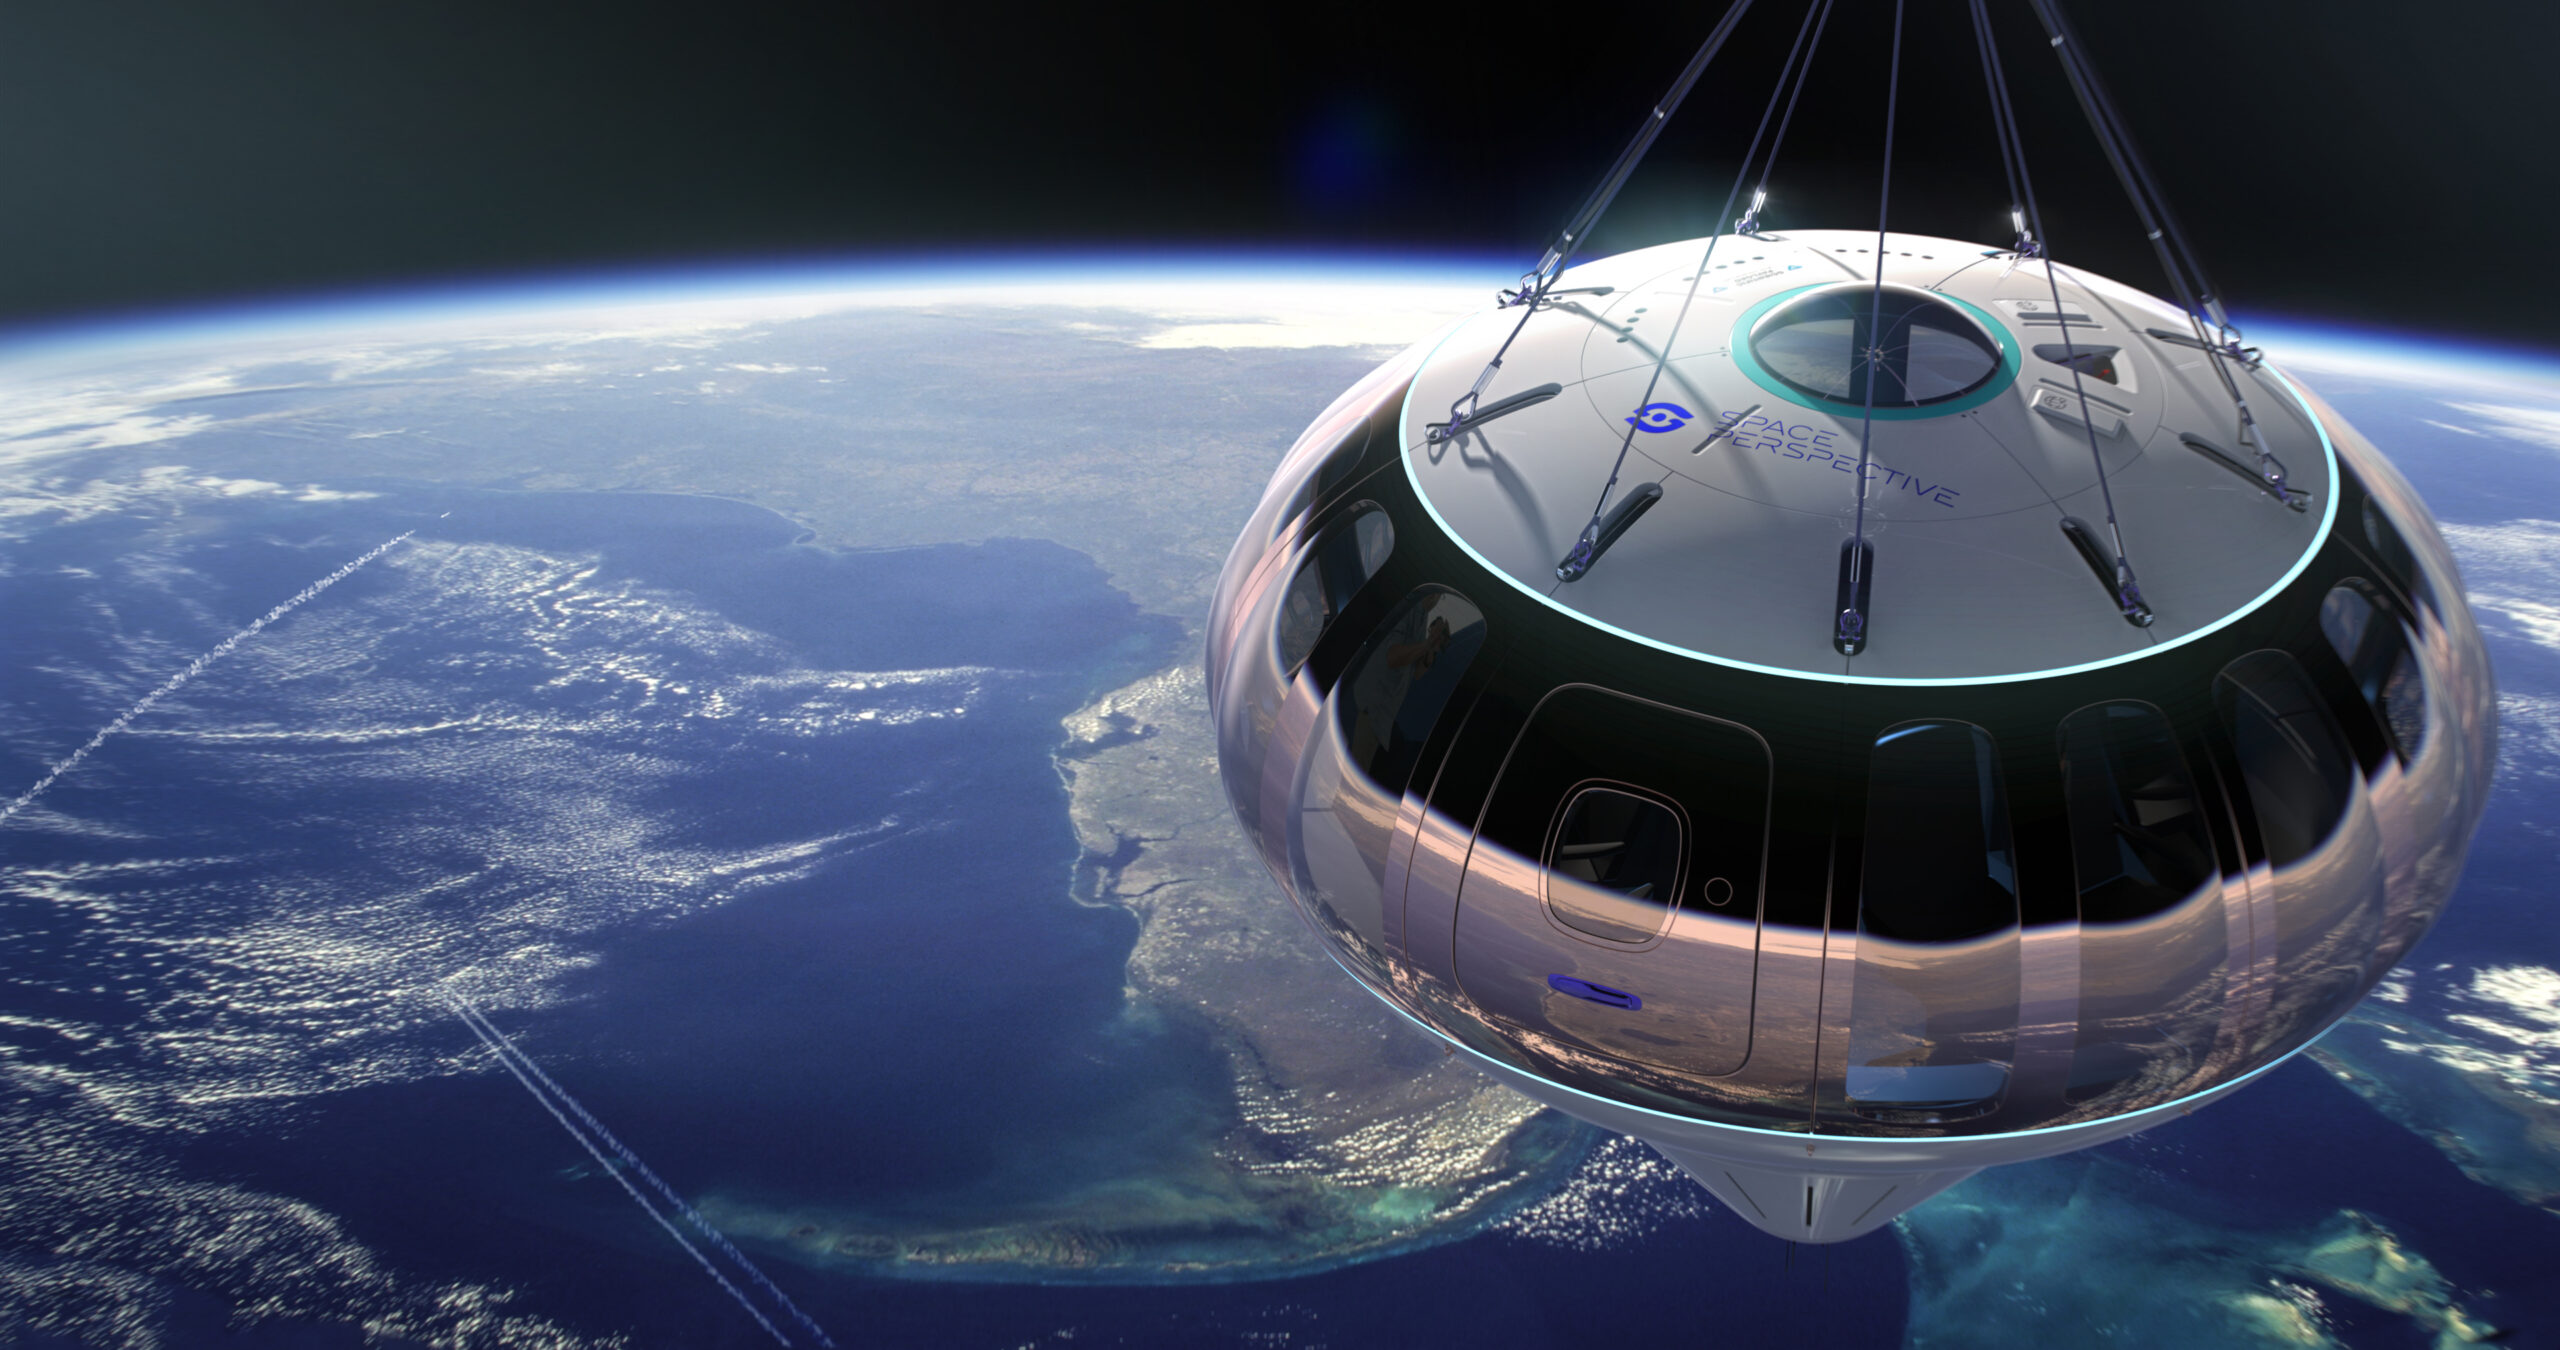 The Space Perspective Space Ship Neptune Floats Above the Earth